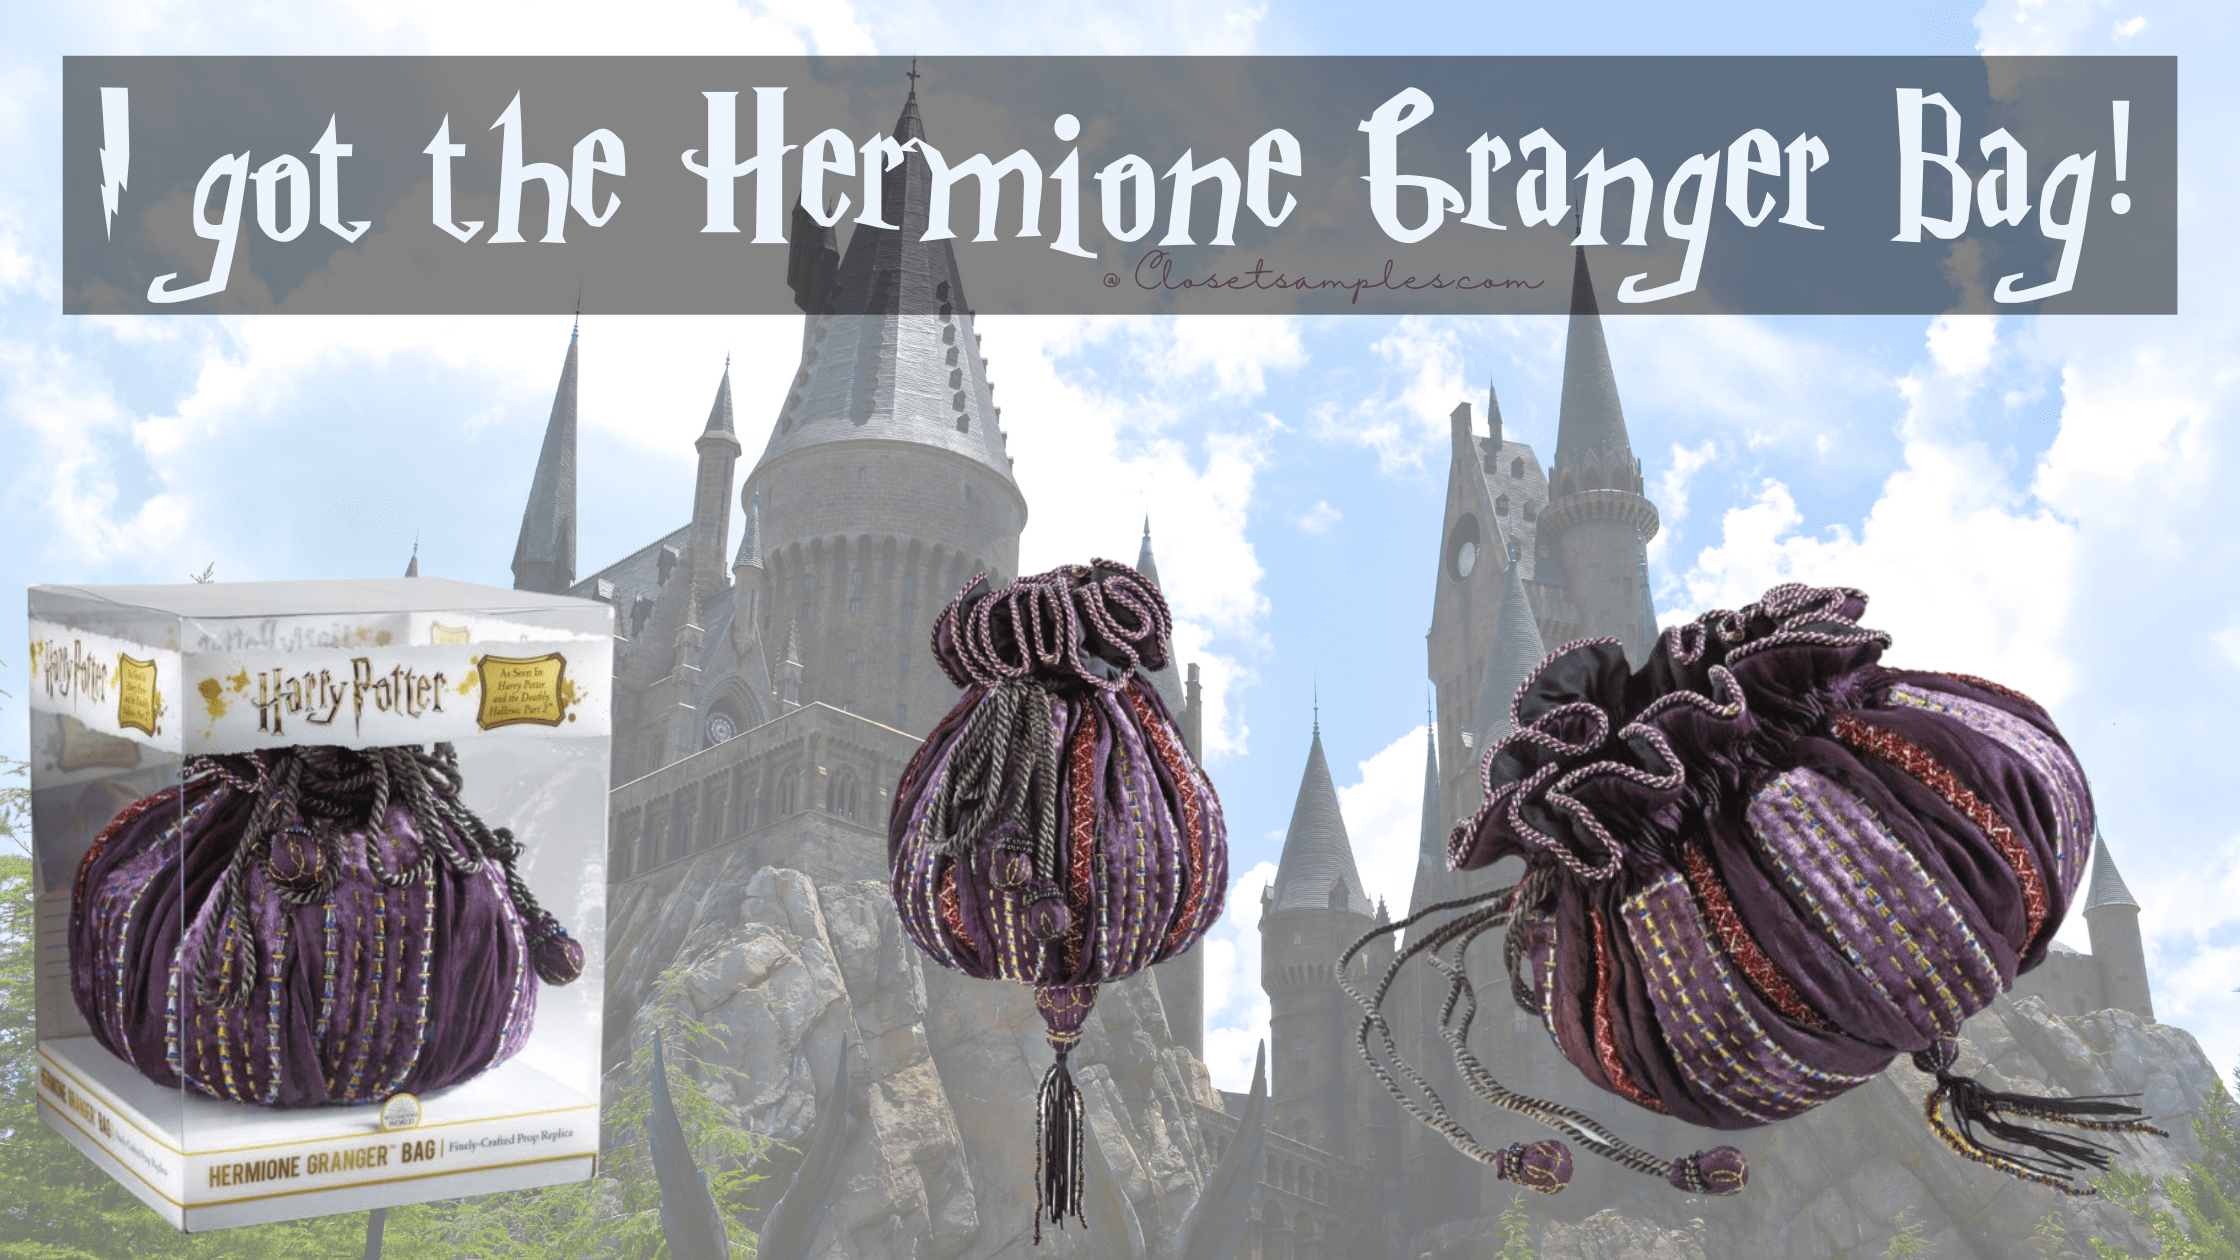 I got the Hermione Granger Bag and I LOVE it!